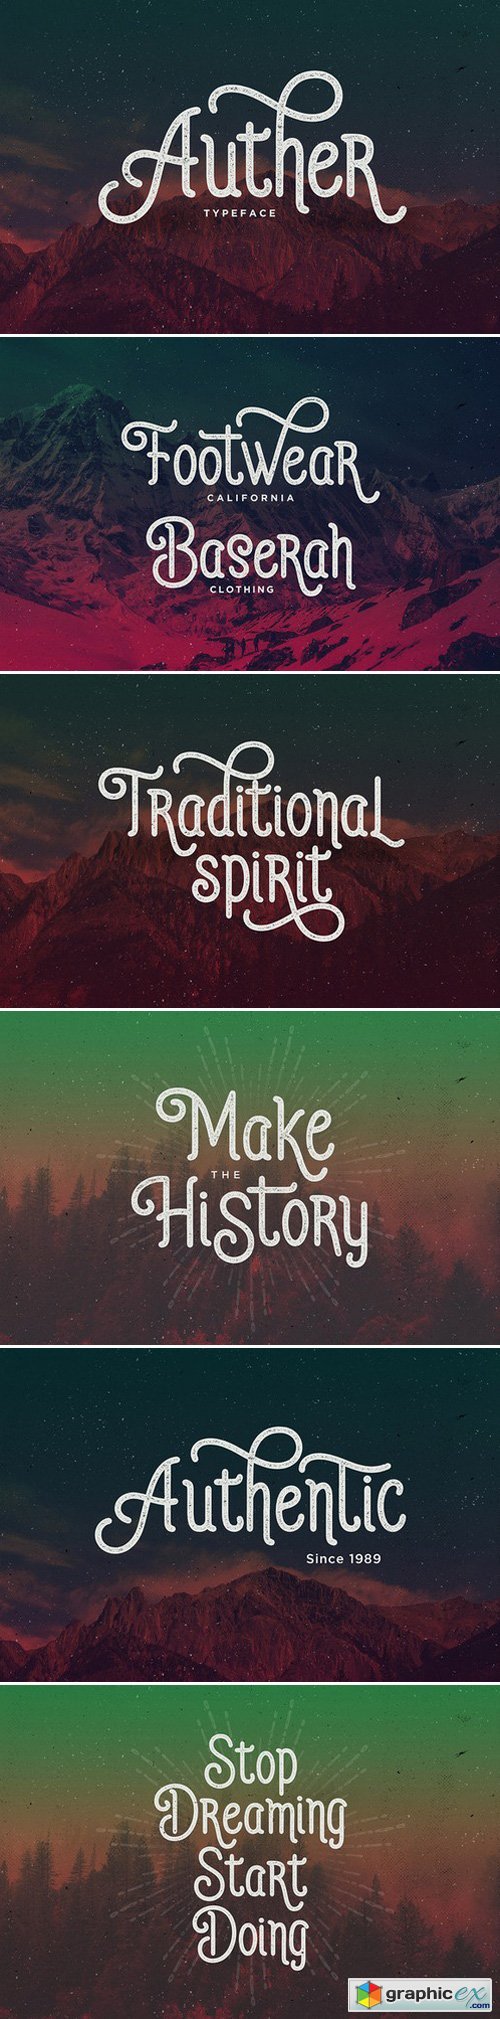 Auther Typeface